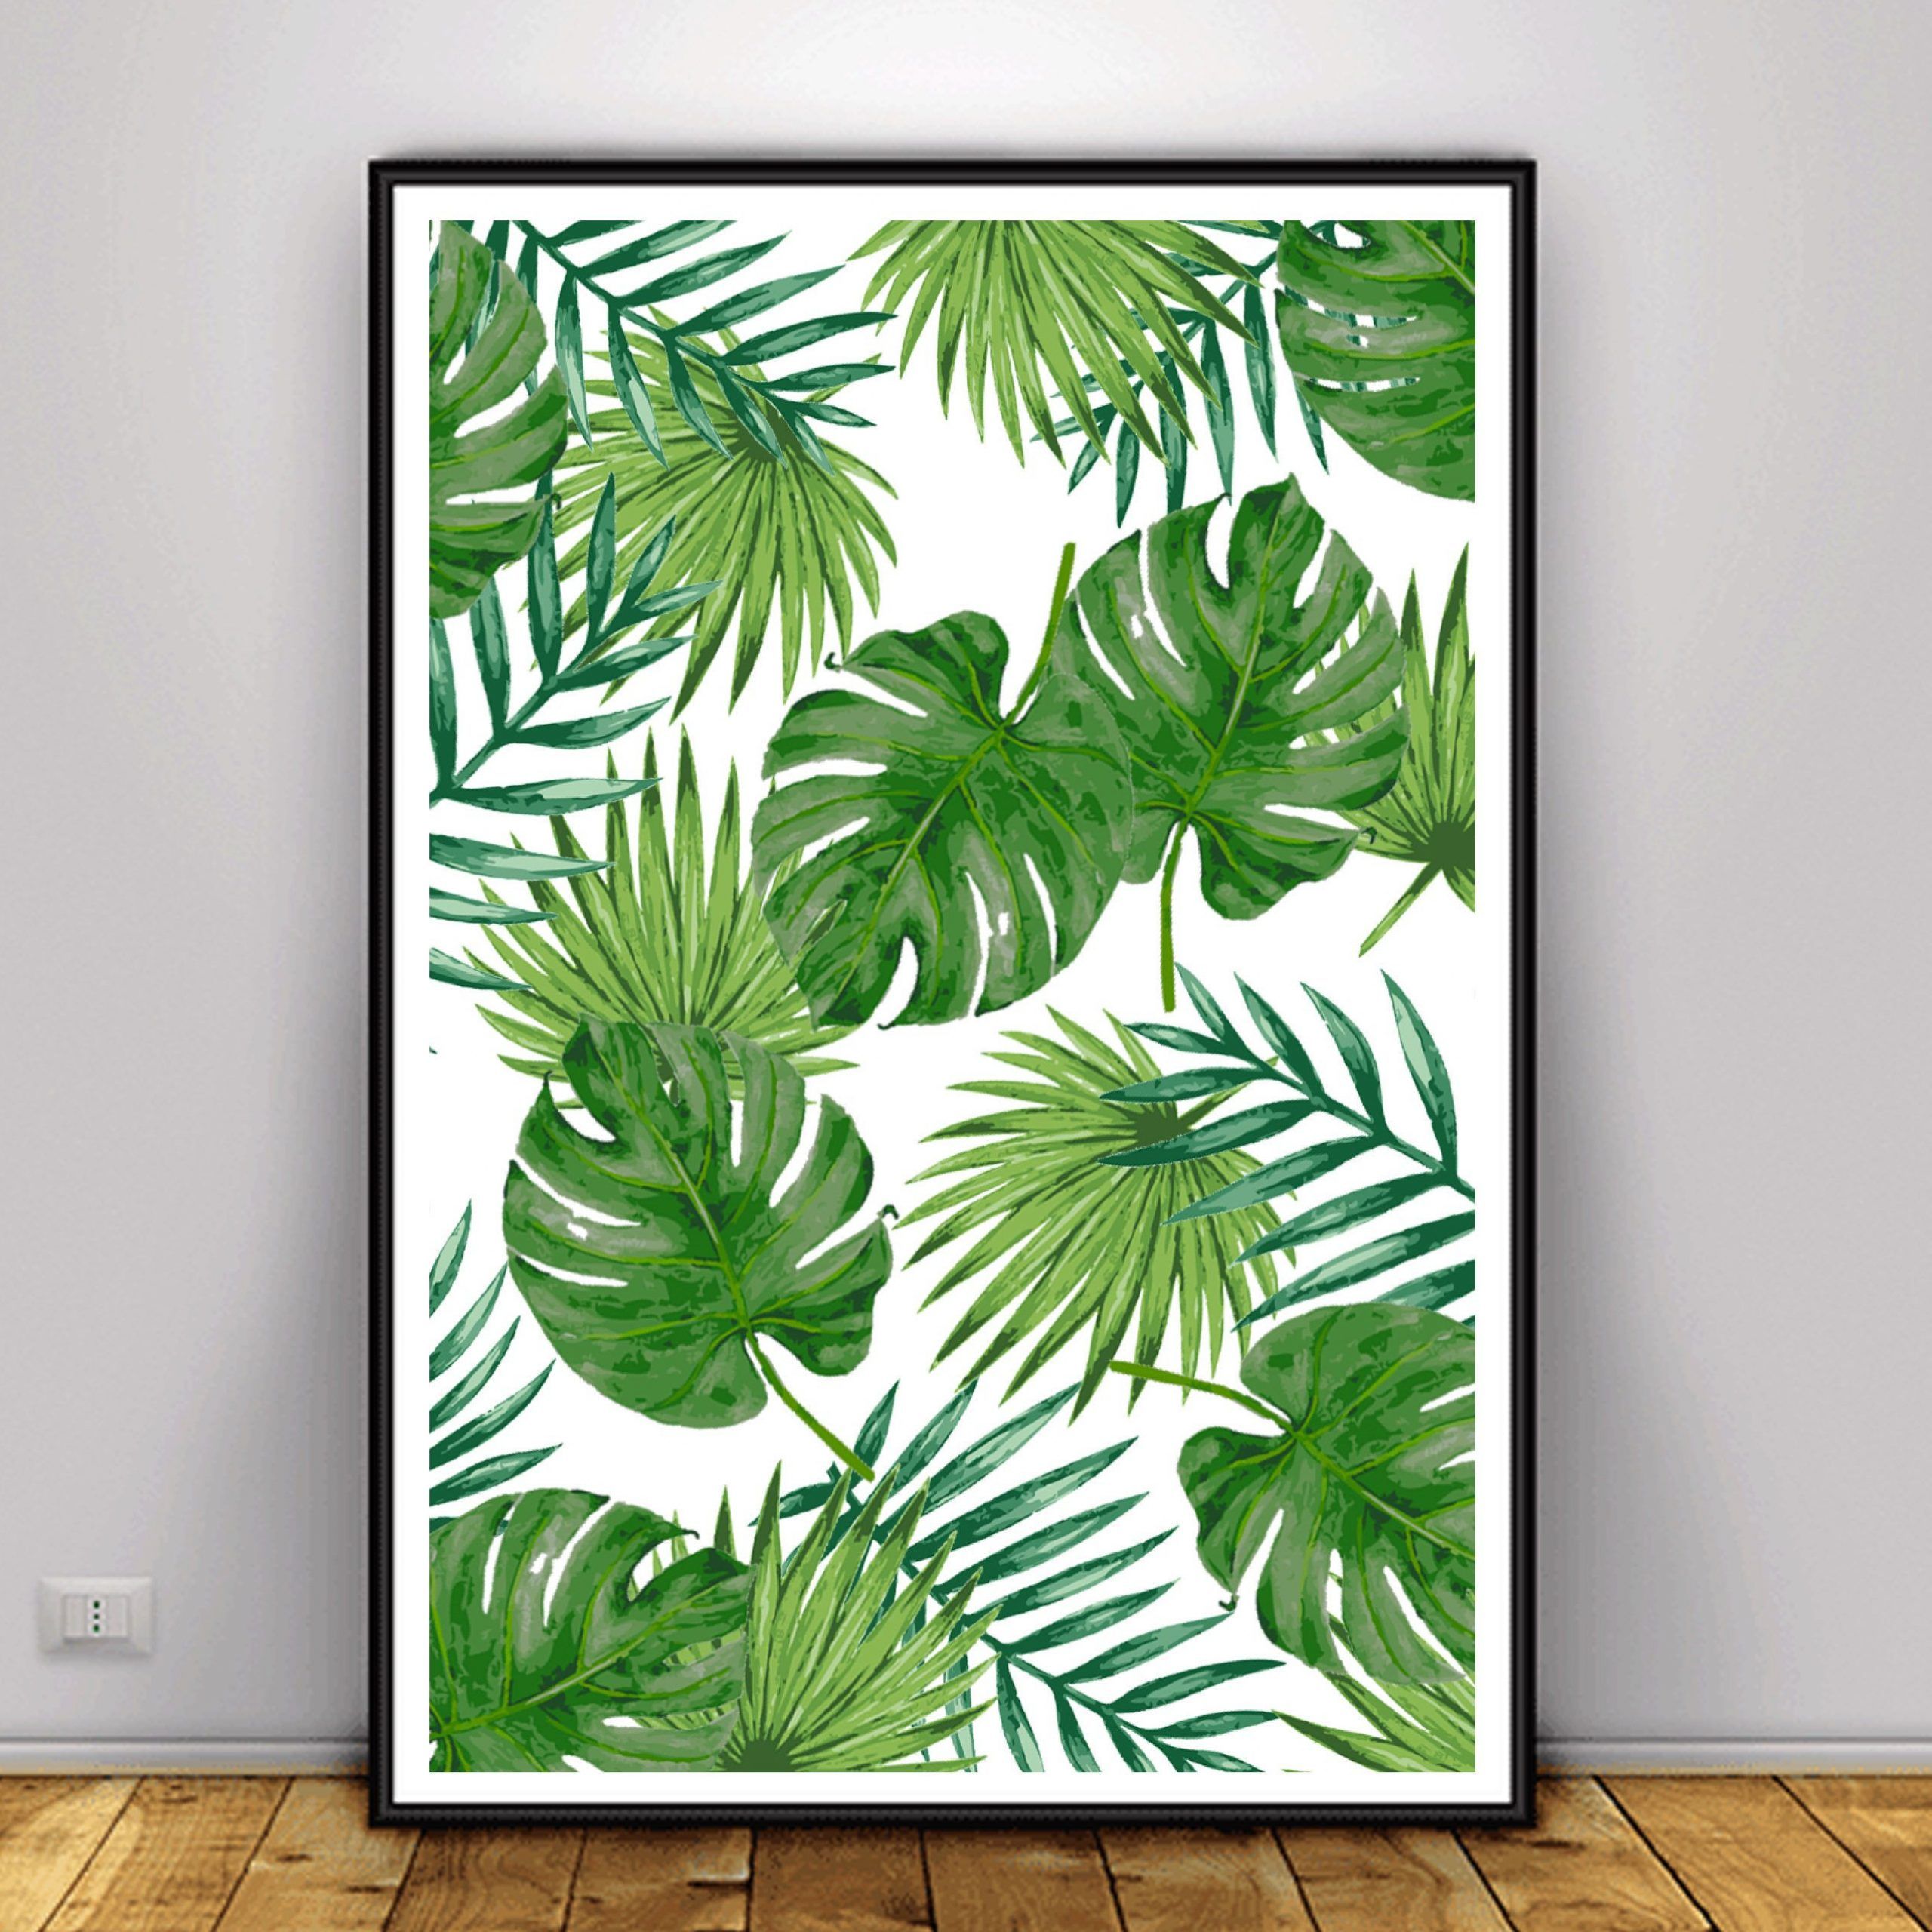 Widely Used Palm Leaves Wall Art With Regard To Tropical Leaf Print, Banana Leaf Print, Palm Leaf Poster (View 3 of 20)